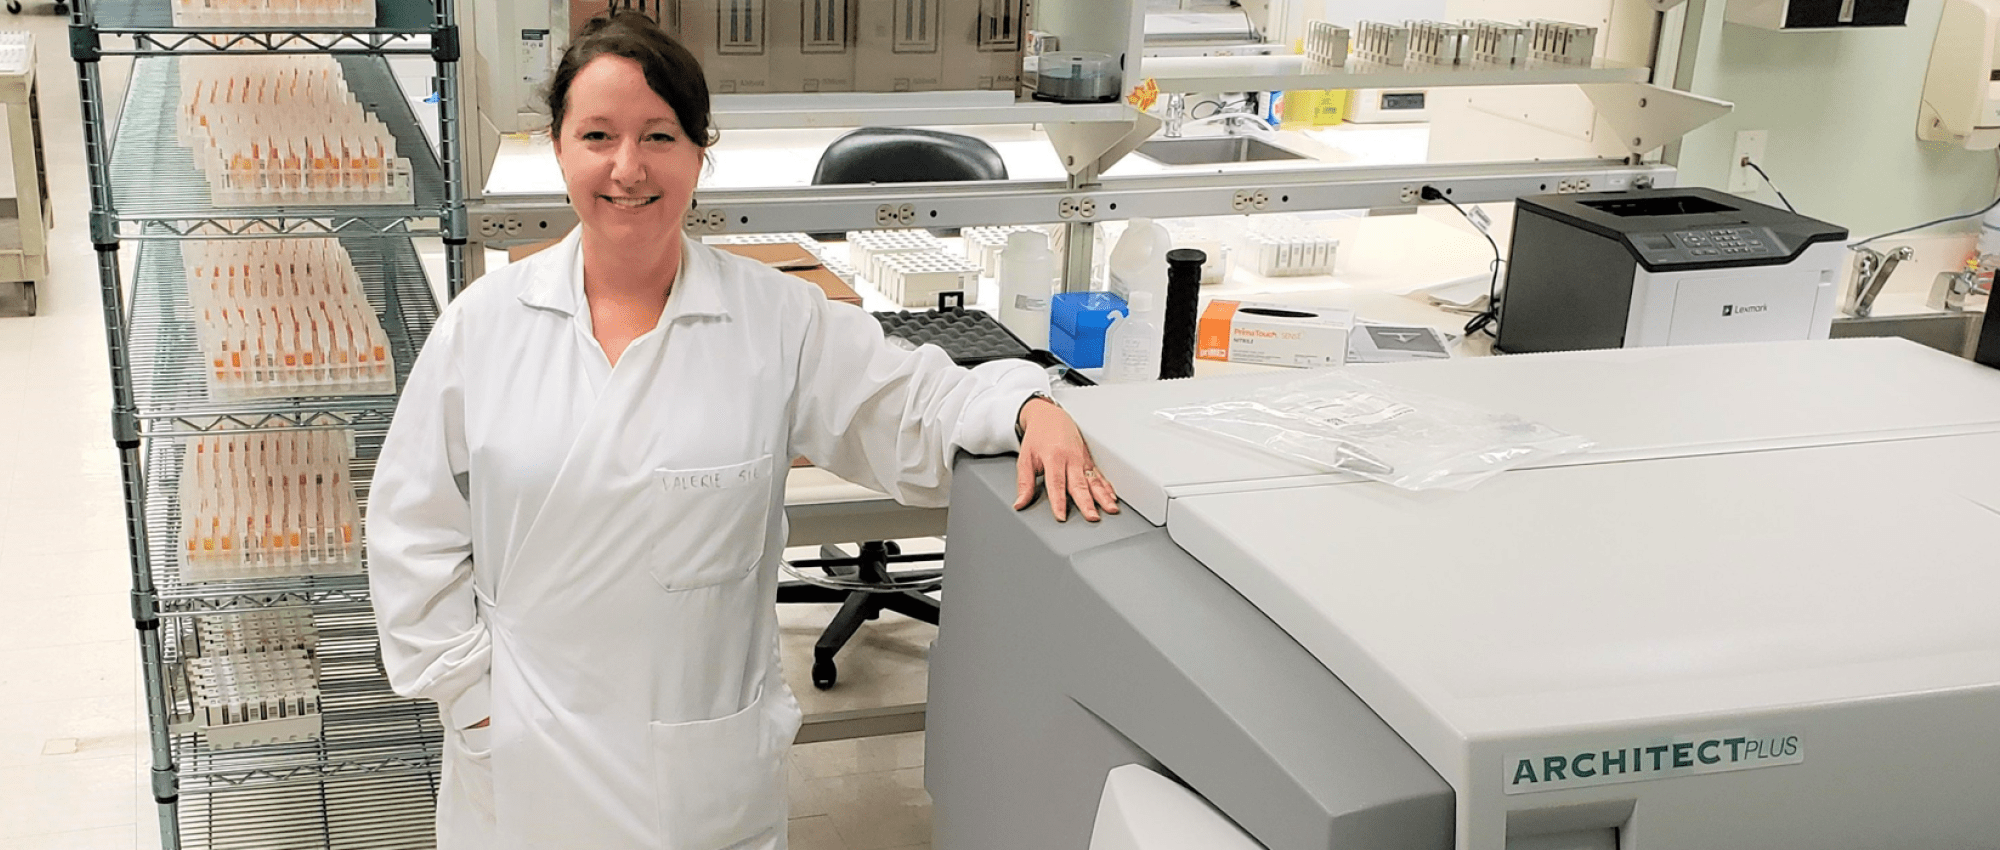 Valerie Conrod, a senior medical laboratory technologist, is in charge of operating the high-throughput analyzers for COVID-19 antibody assessment in blood donors as part of our collaboration with the COVID-19 Immunity Task Force.